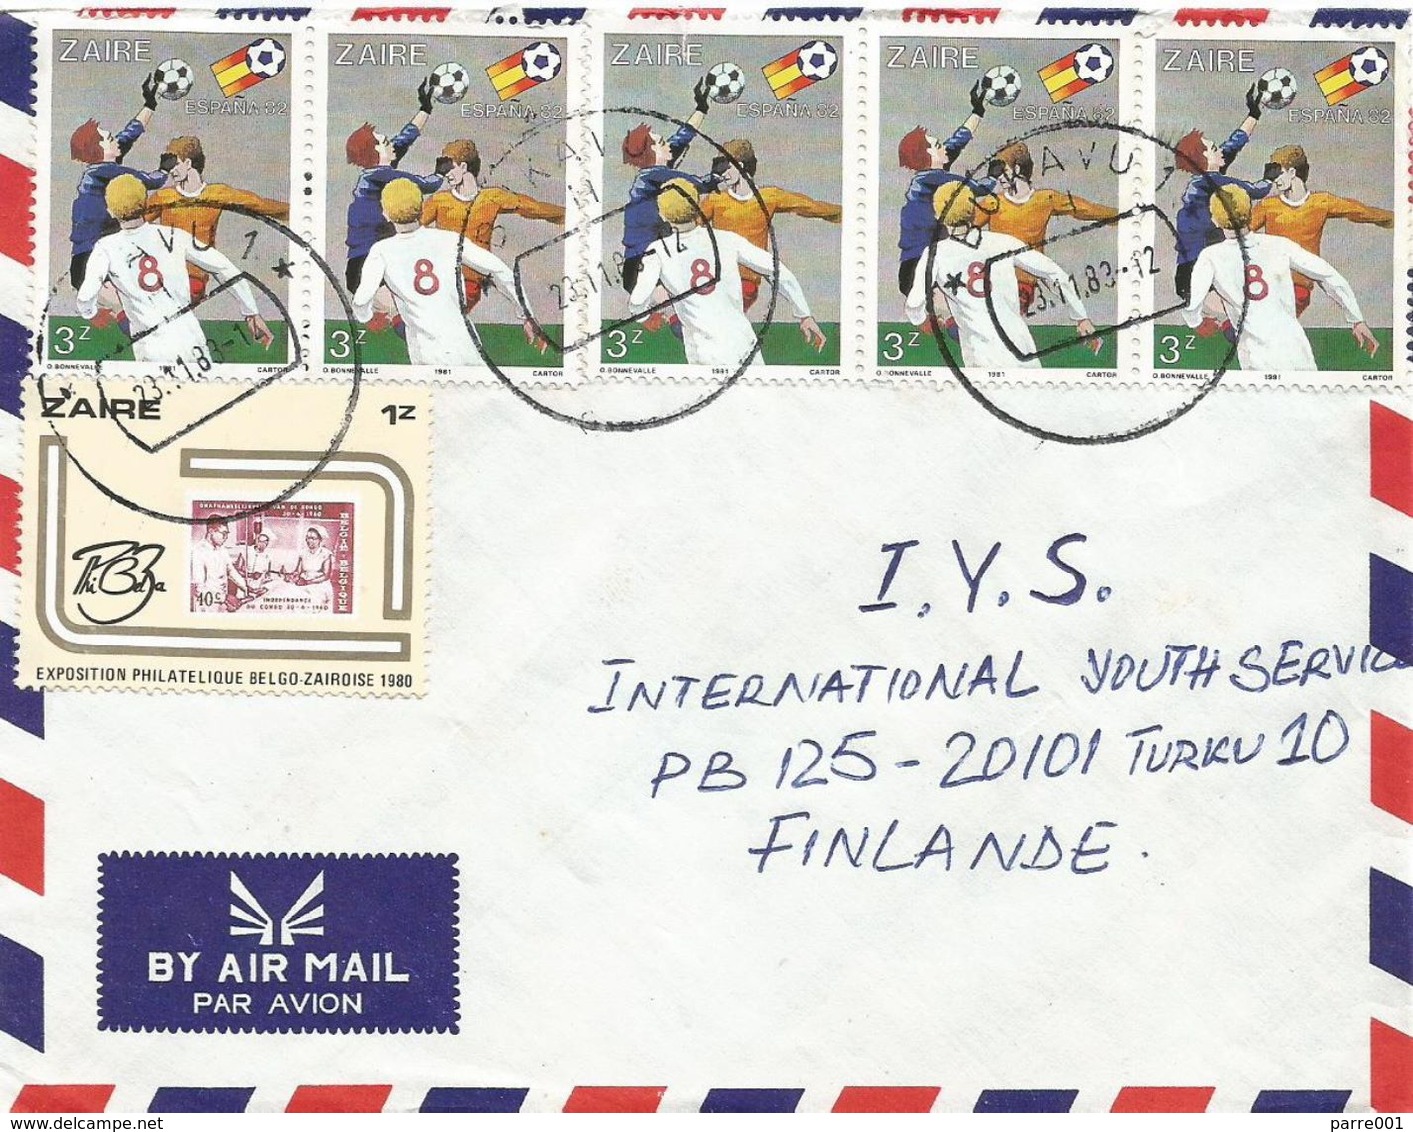 Zaire DRC Congo 1983 Bukavu World Cup Football Spain 3Z Stamp Exhibition Stamps On Stamps 1Z Cover - Usados